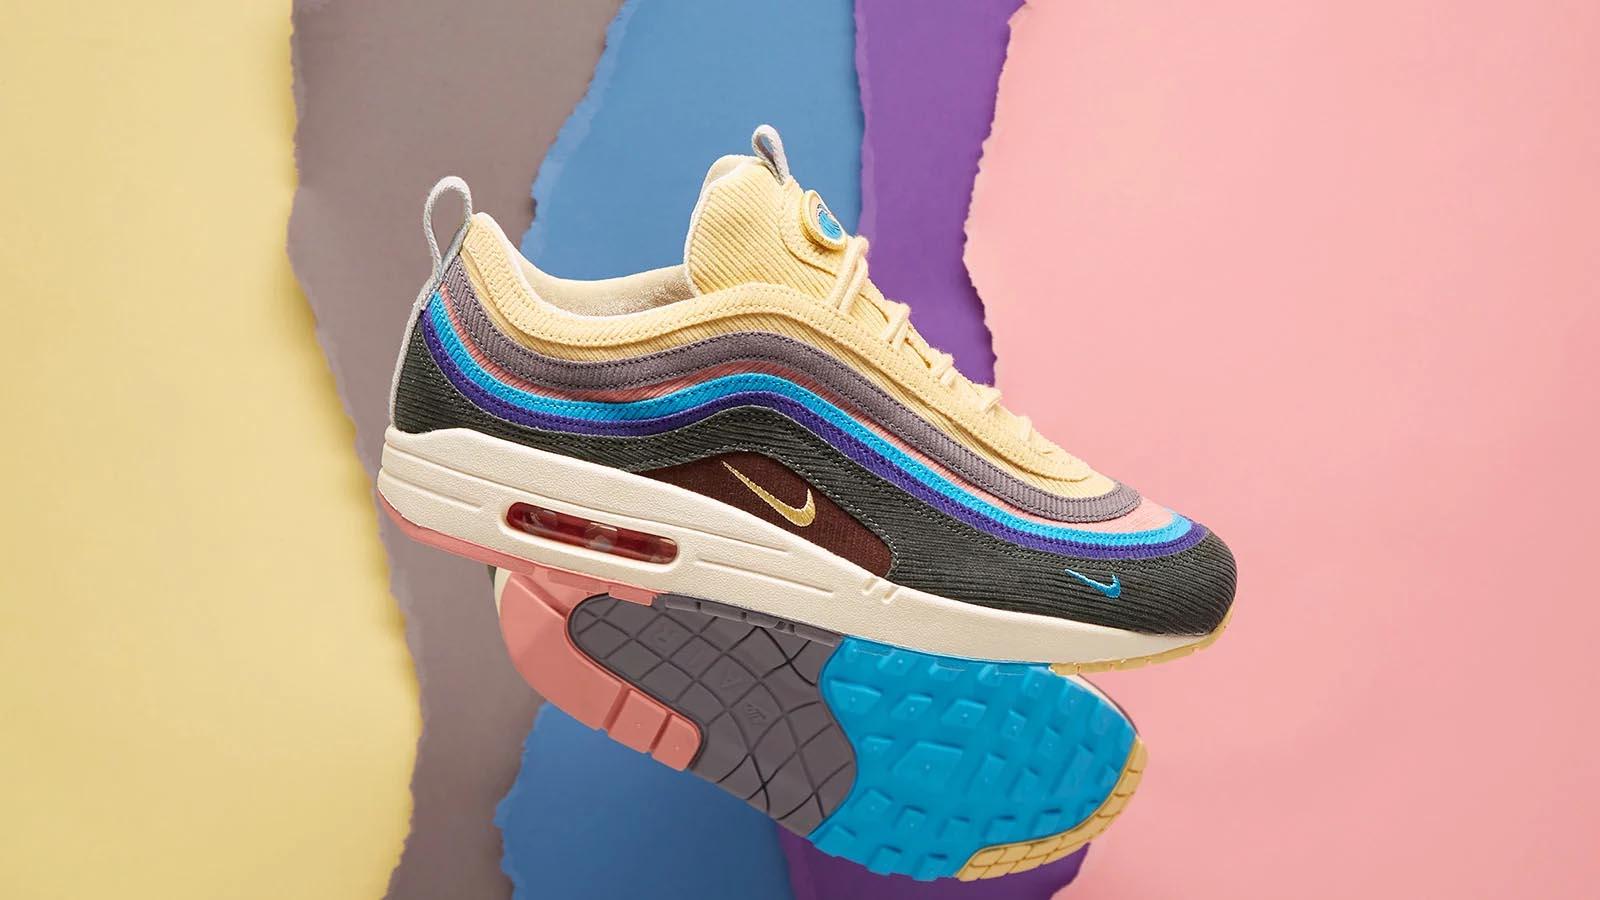 The Sean Wotherspoon X Nike Air Max 1 97 Is Getting A